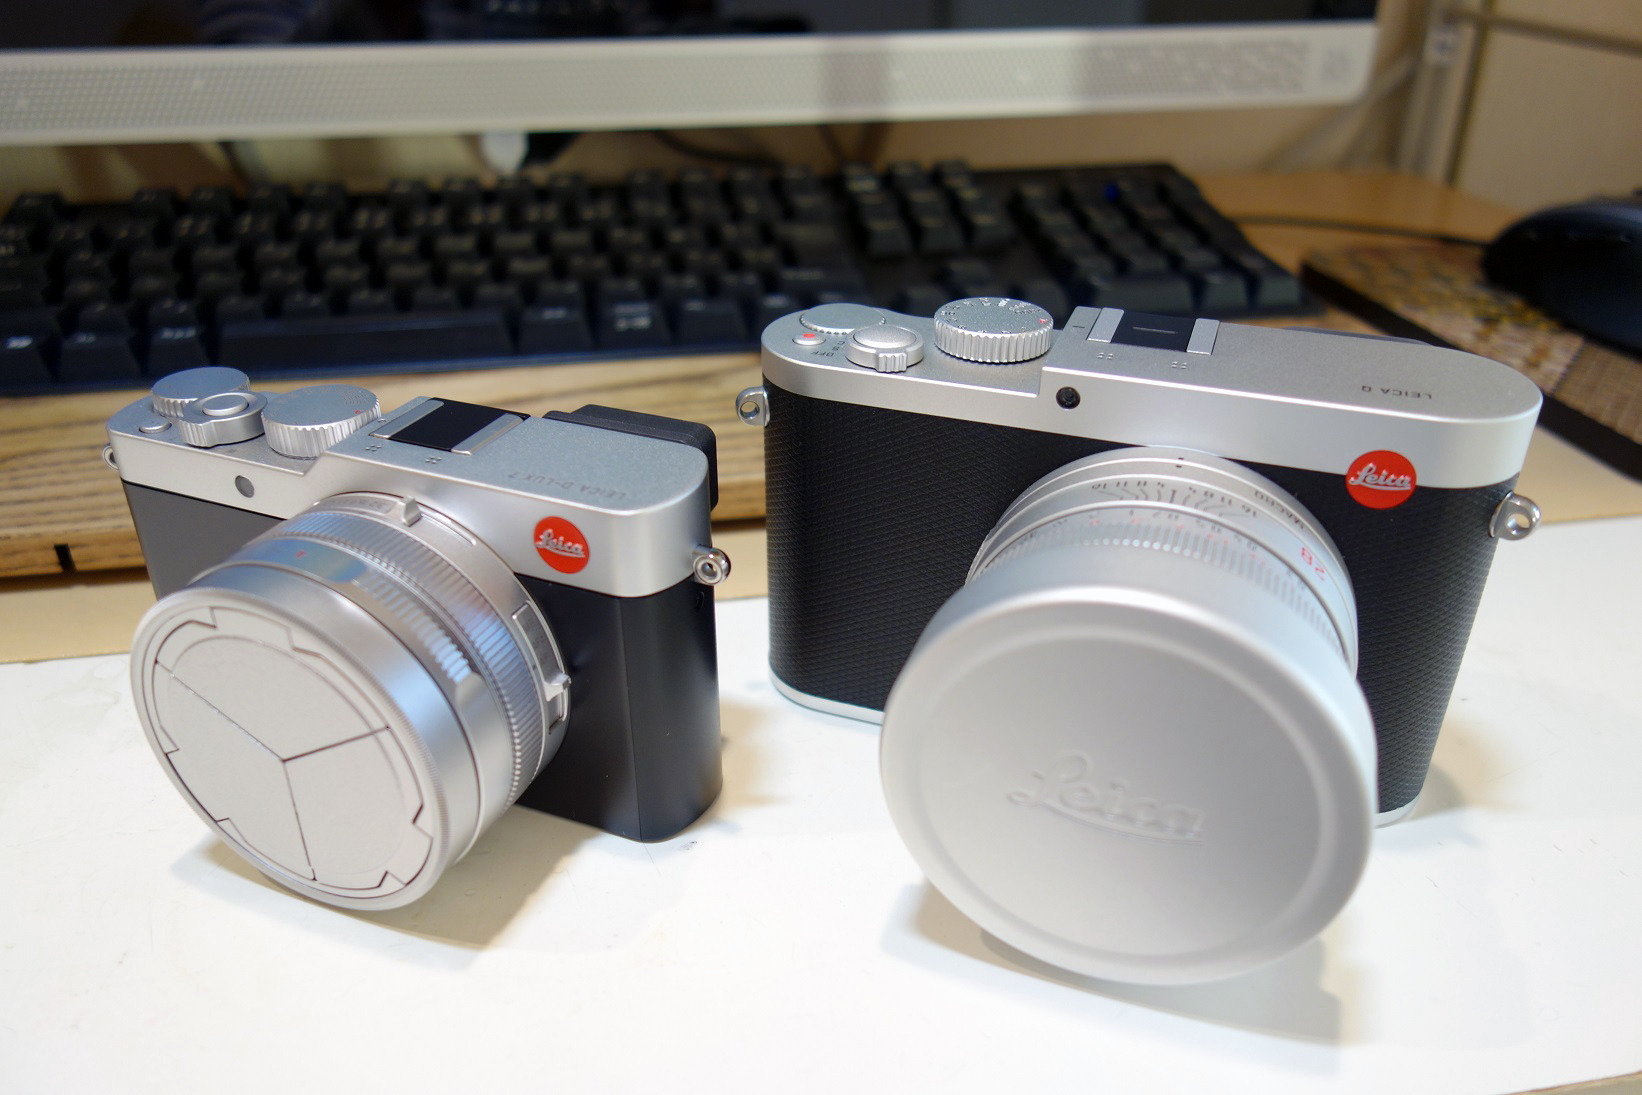 LEICA D-LUX7が来ました(^^) - fclife.tokyo